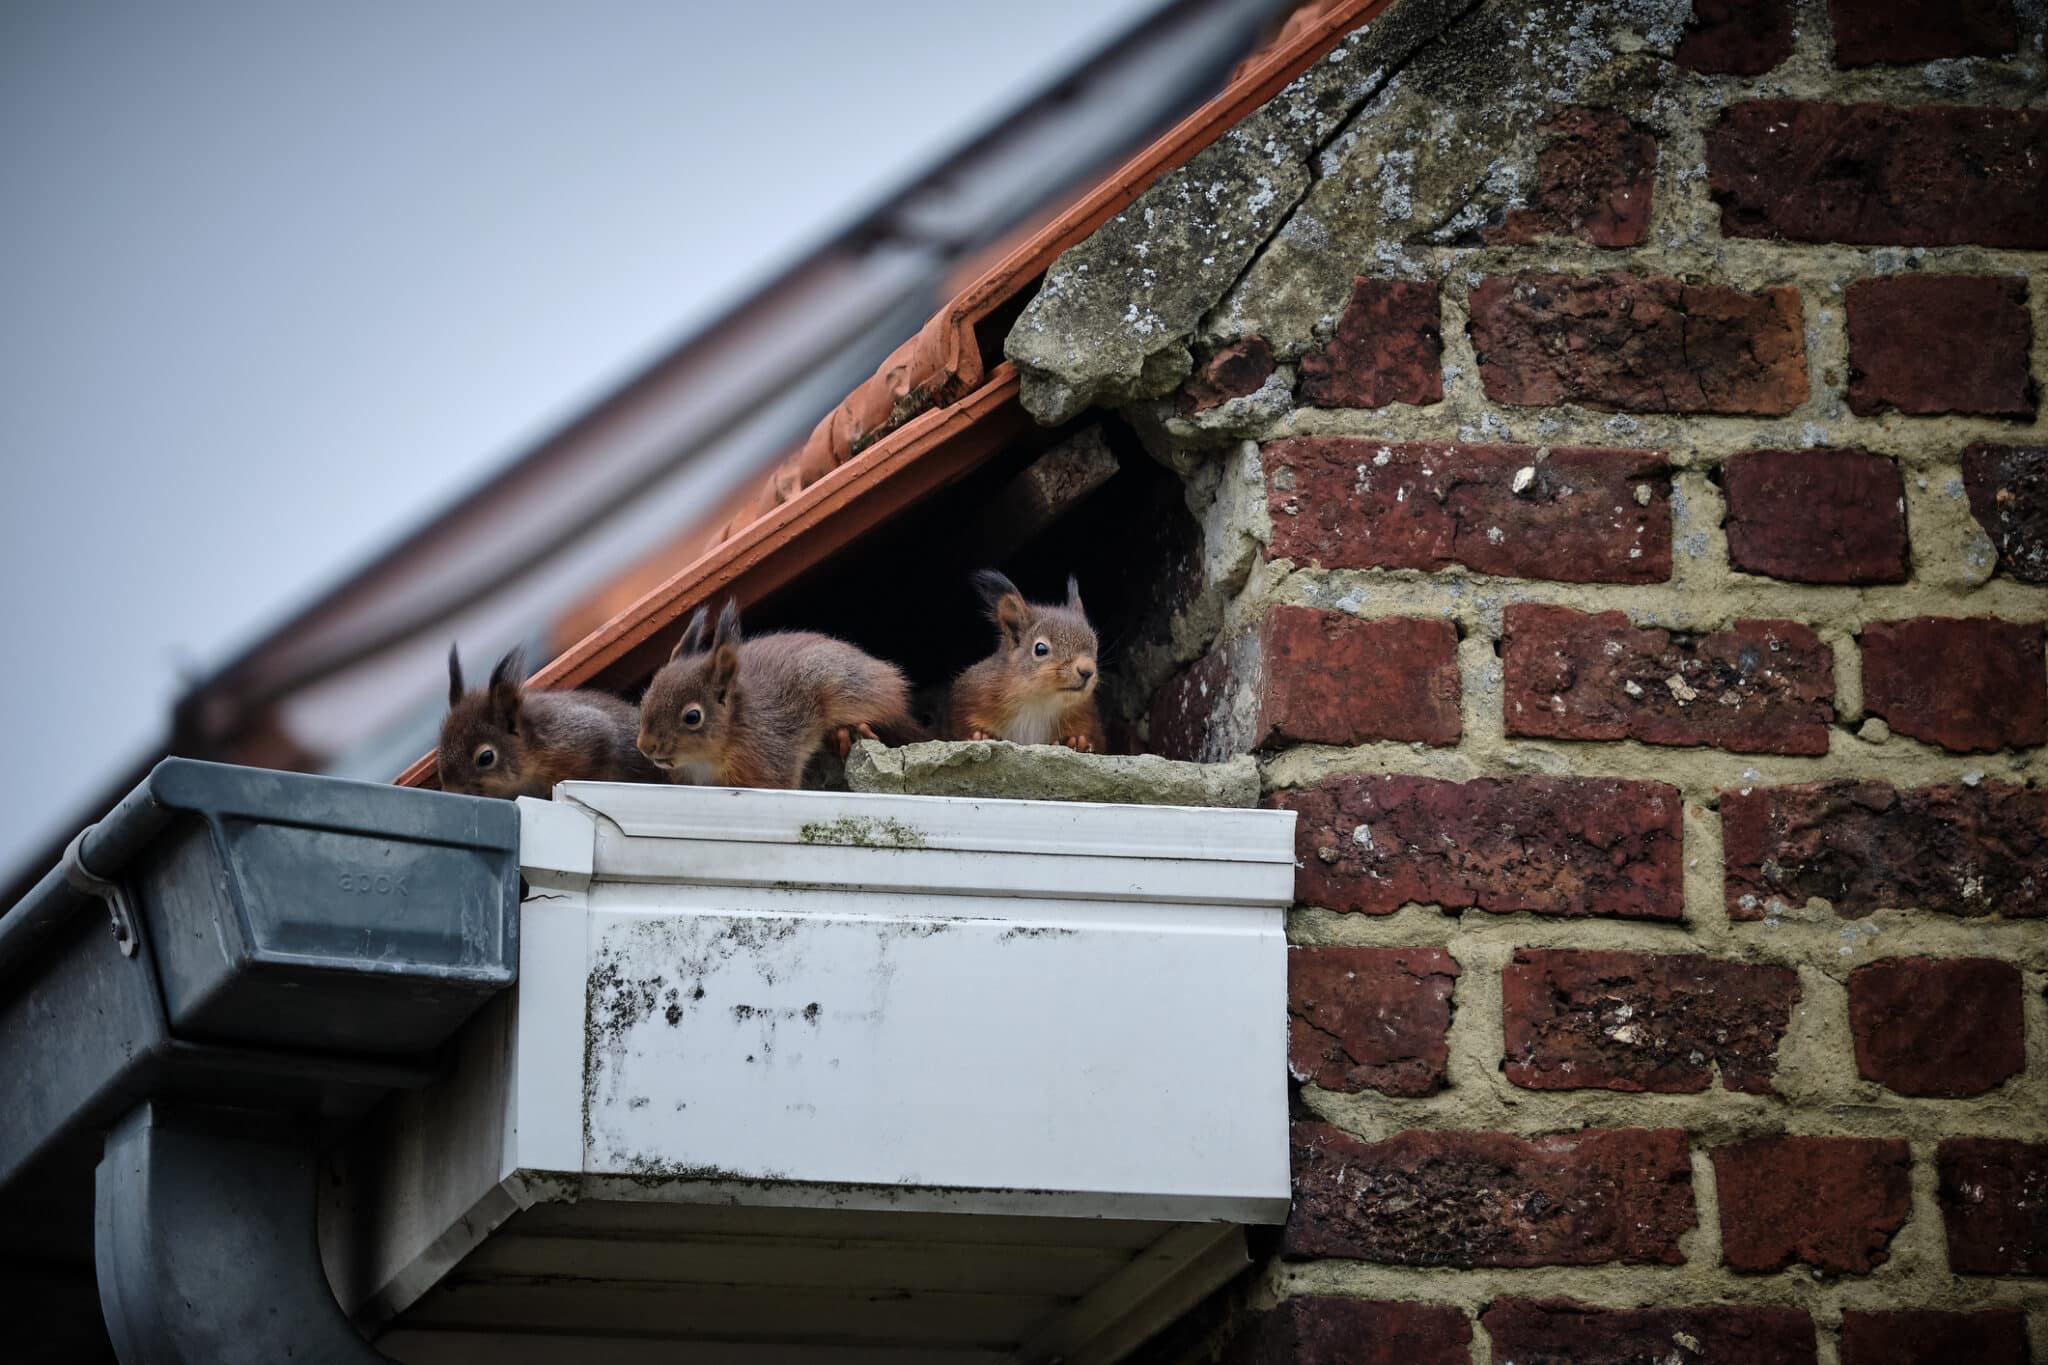 Roofers Trap Squirrels in Attic! What Now!? 